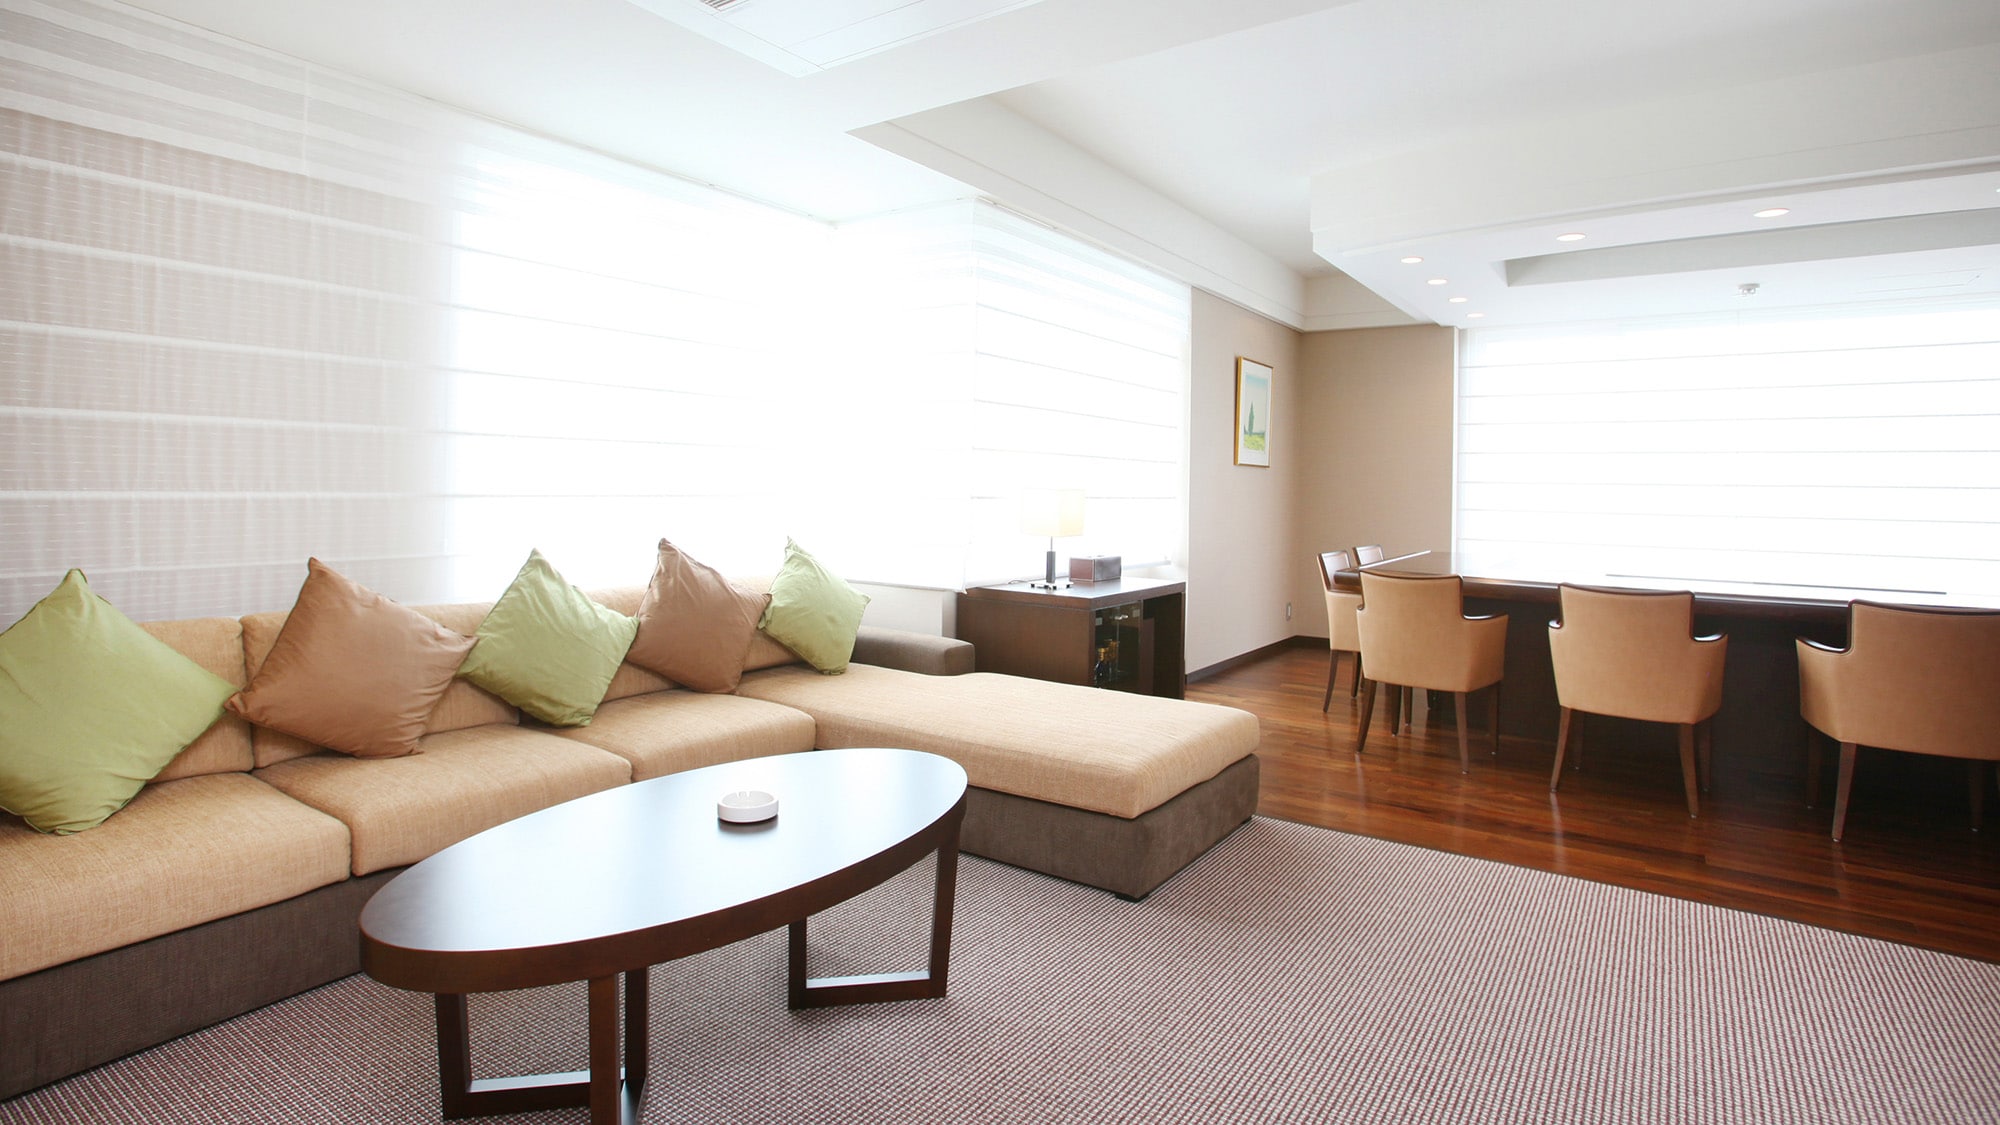 * The living room of the premium suite overlooks the sea of Shirahama! You will be healed by the spacious space and the superb view.